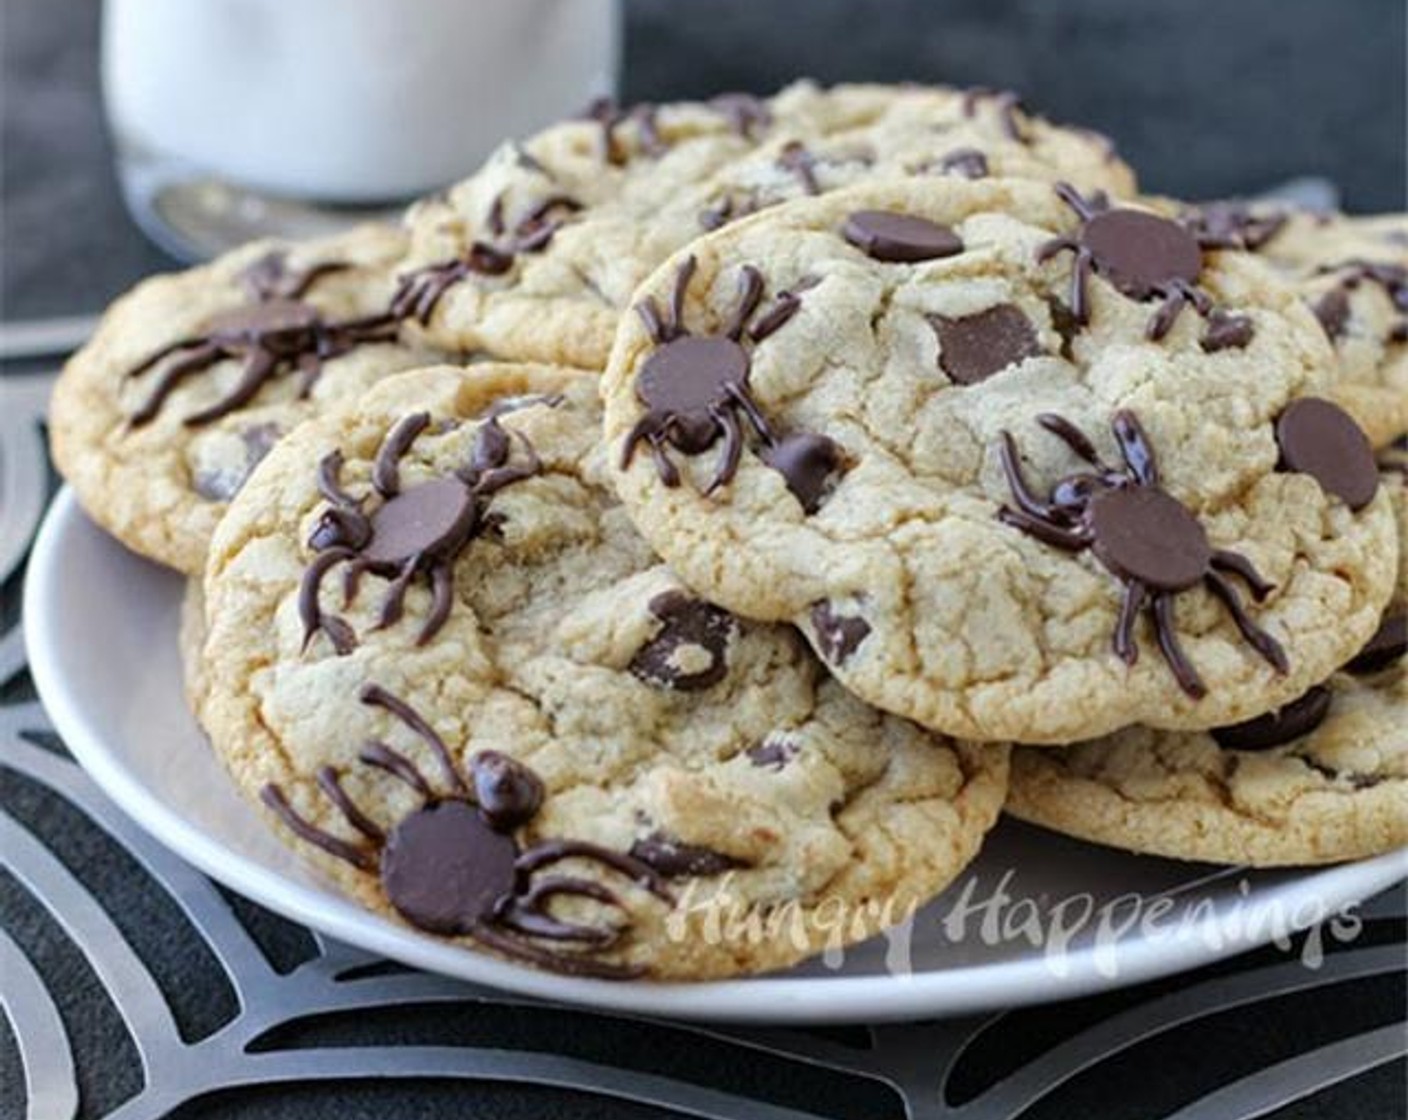 Spider-Infested Chocolate Chip Cookies